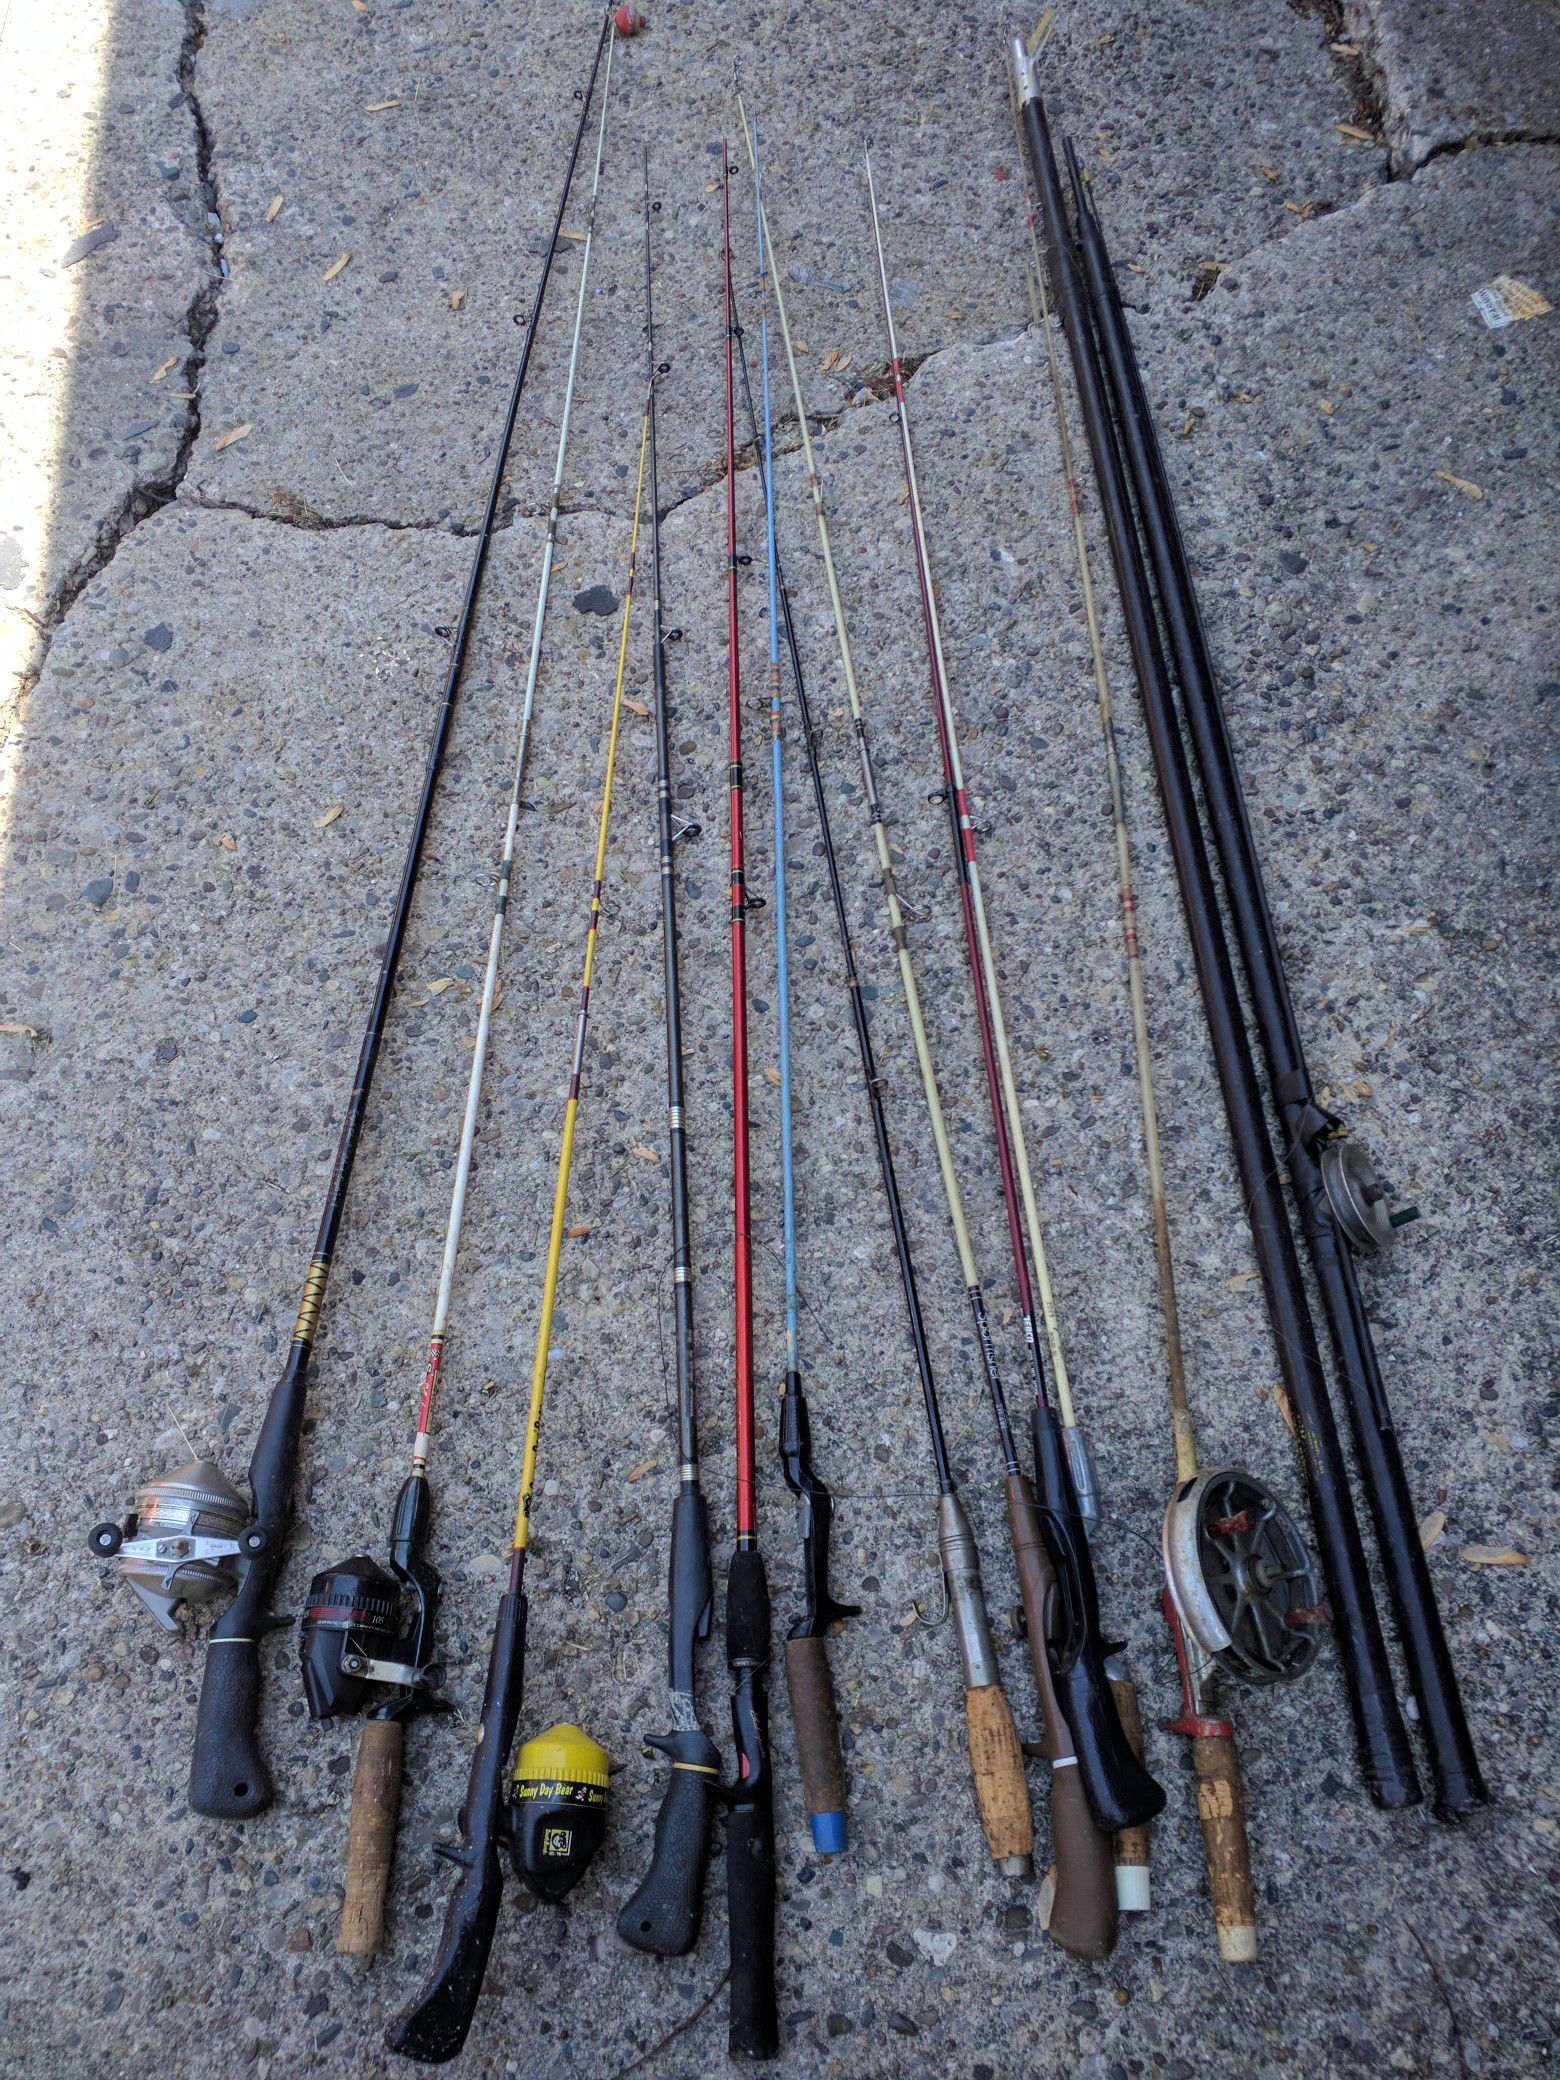 Vintage Fishing equipment, bamboo rods, reels and Lures